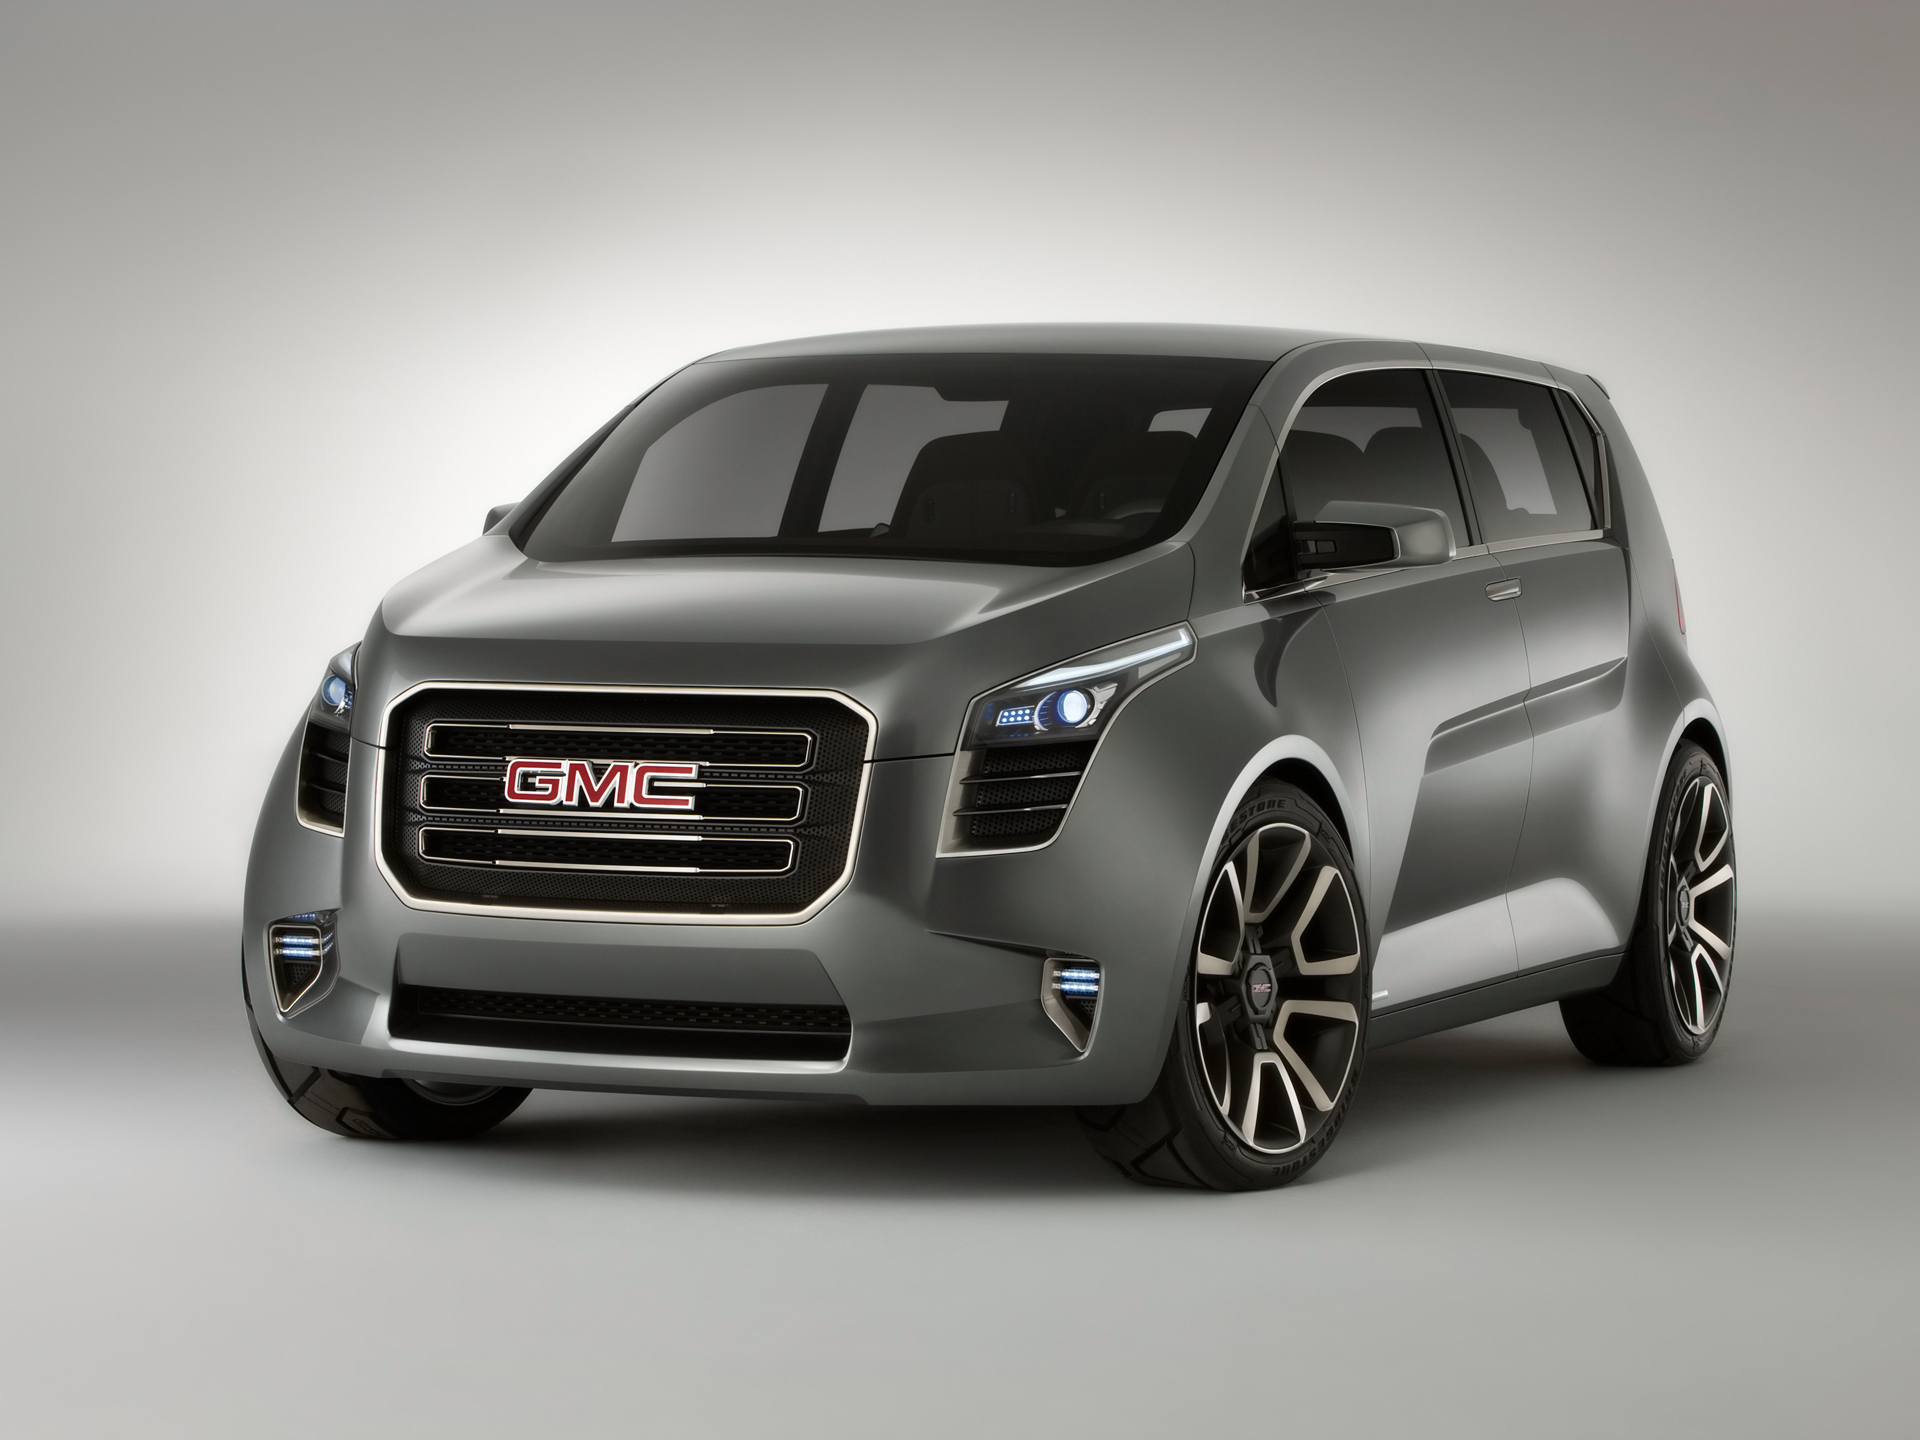 GMC Wallpapers, Pictures, Images